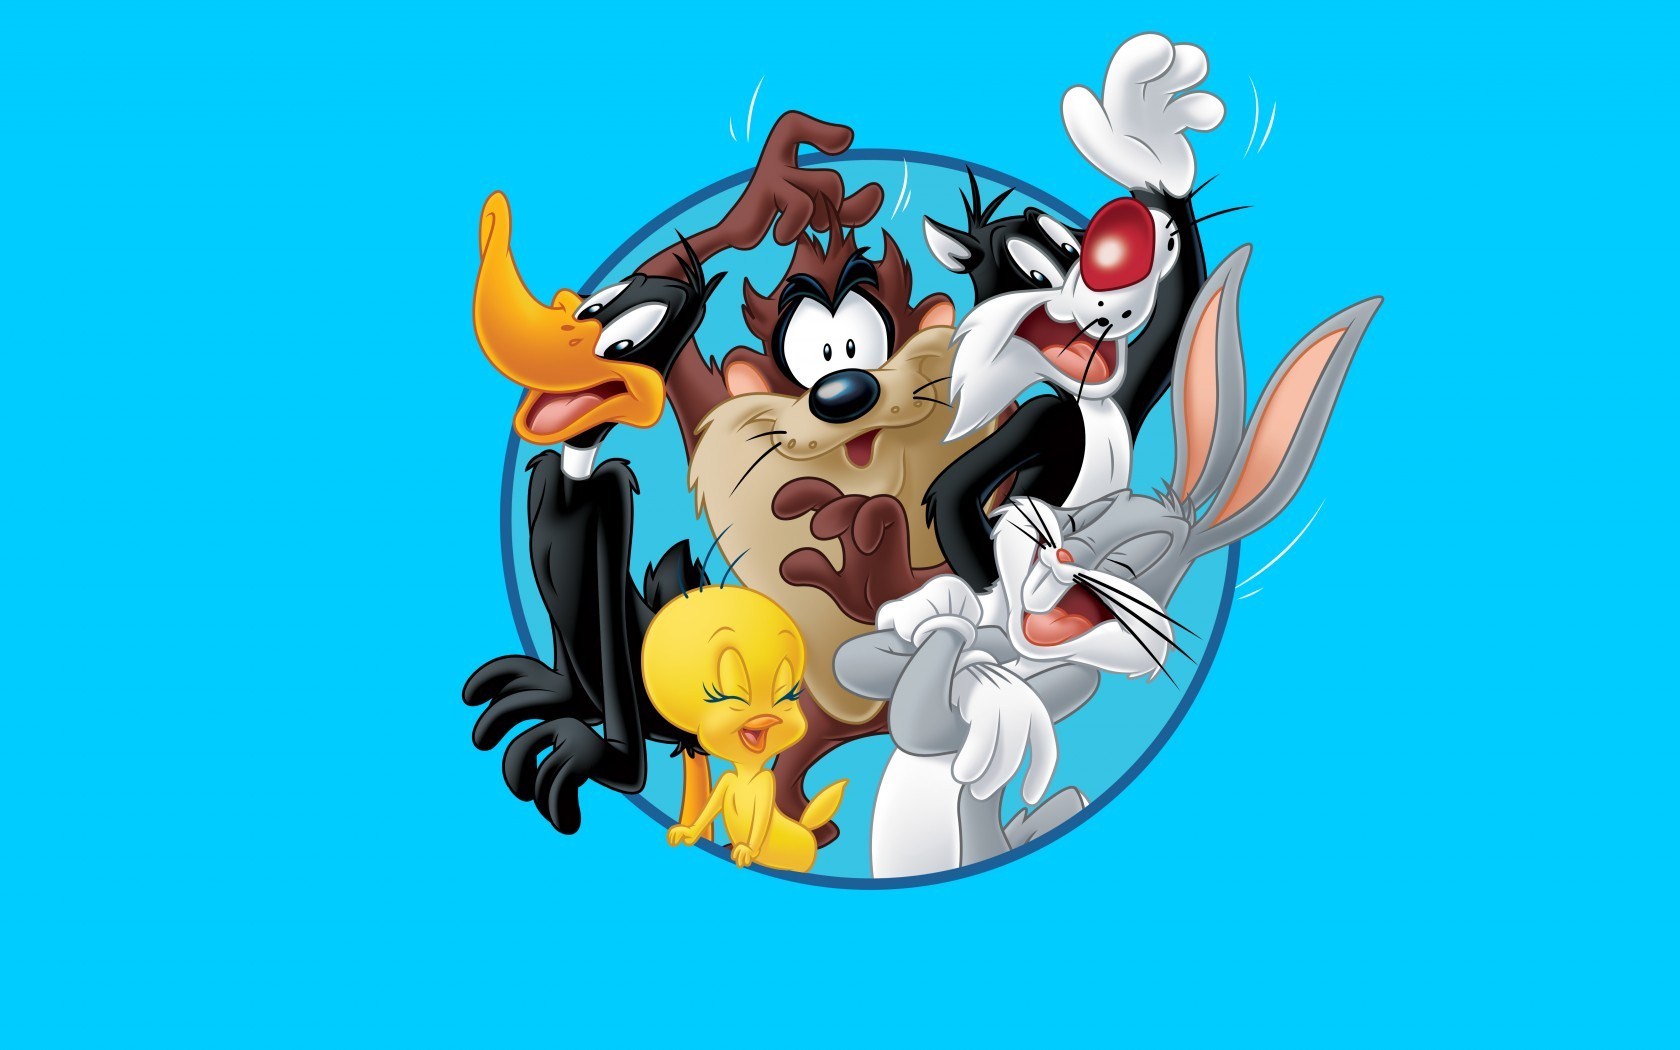 Bugs Bunny and friends